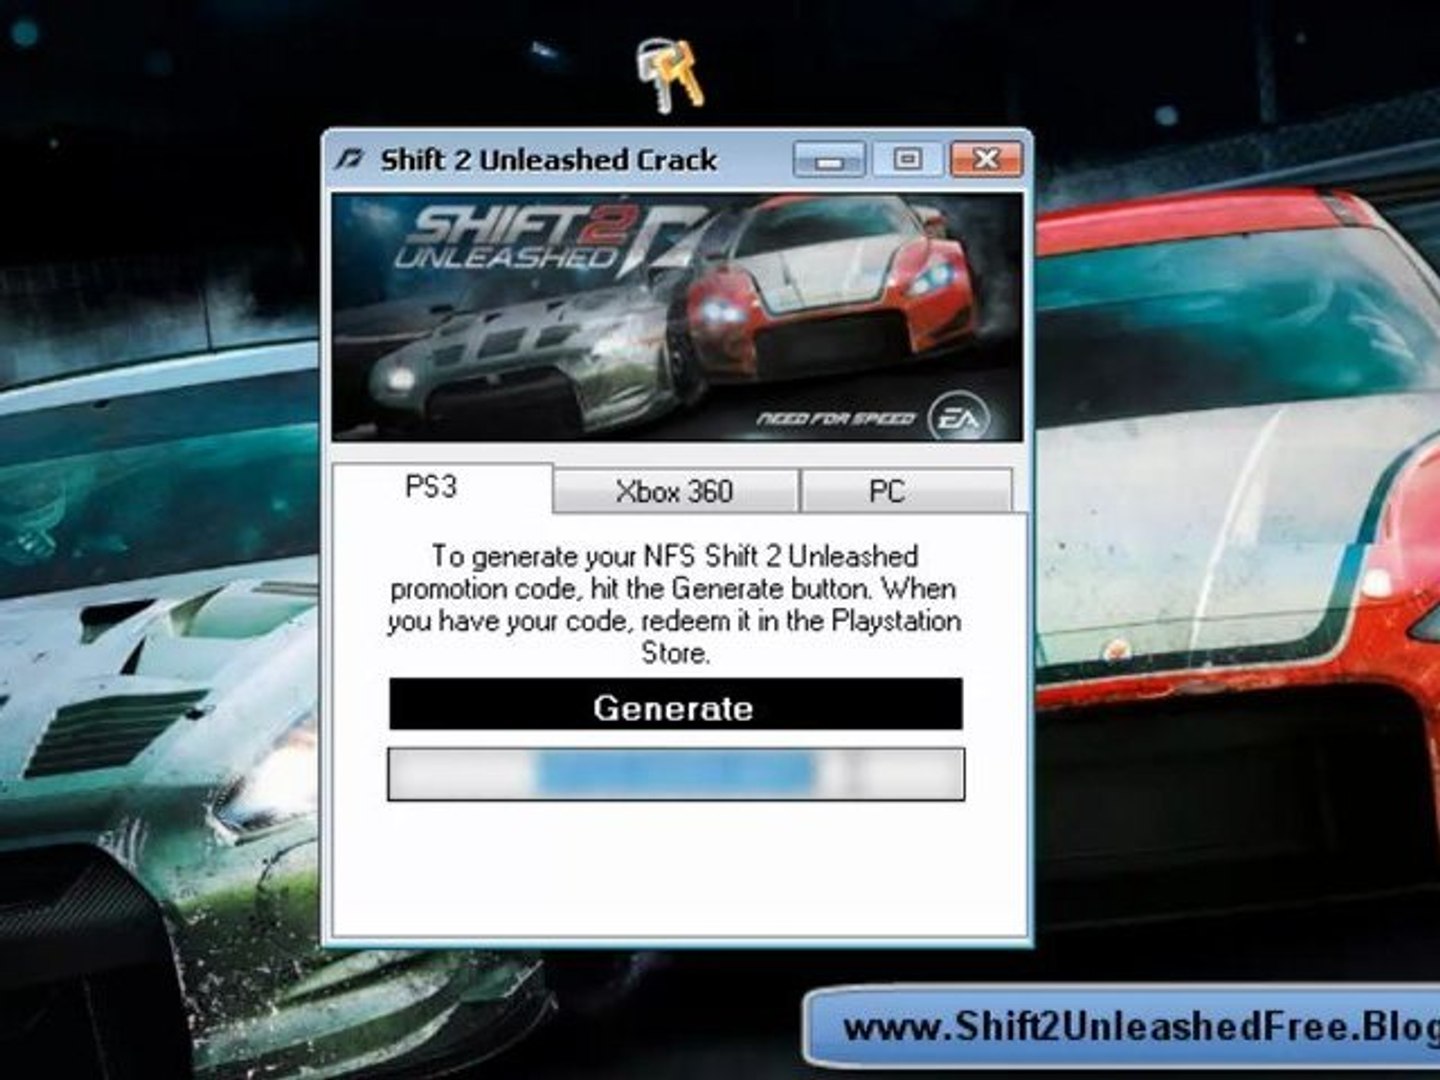 How to Download Need For Speed Shift 2 Unleashed Crack - video Dailymotion